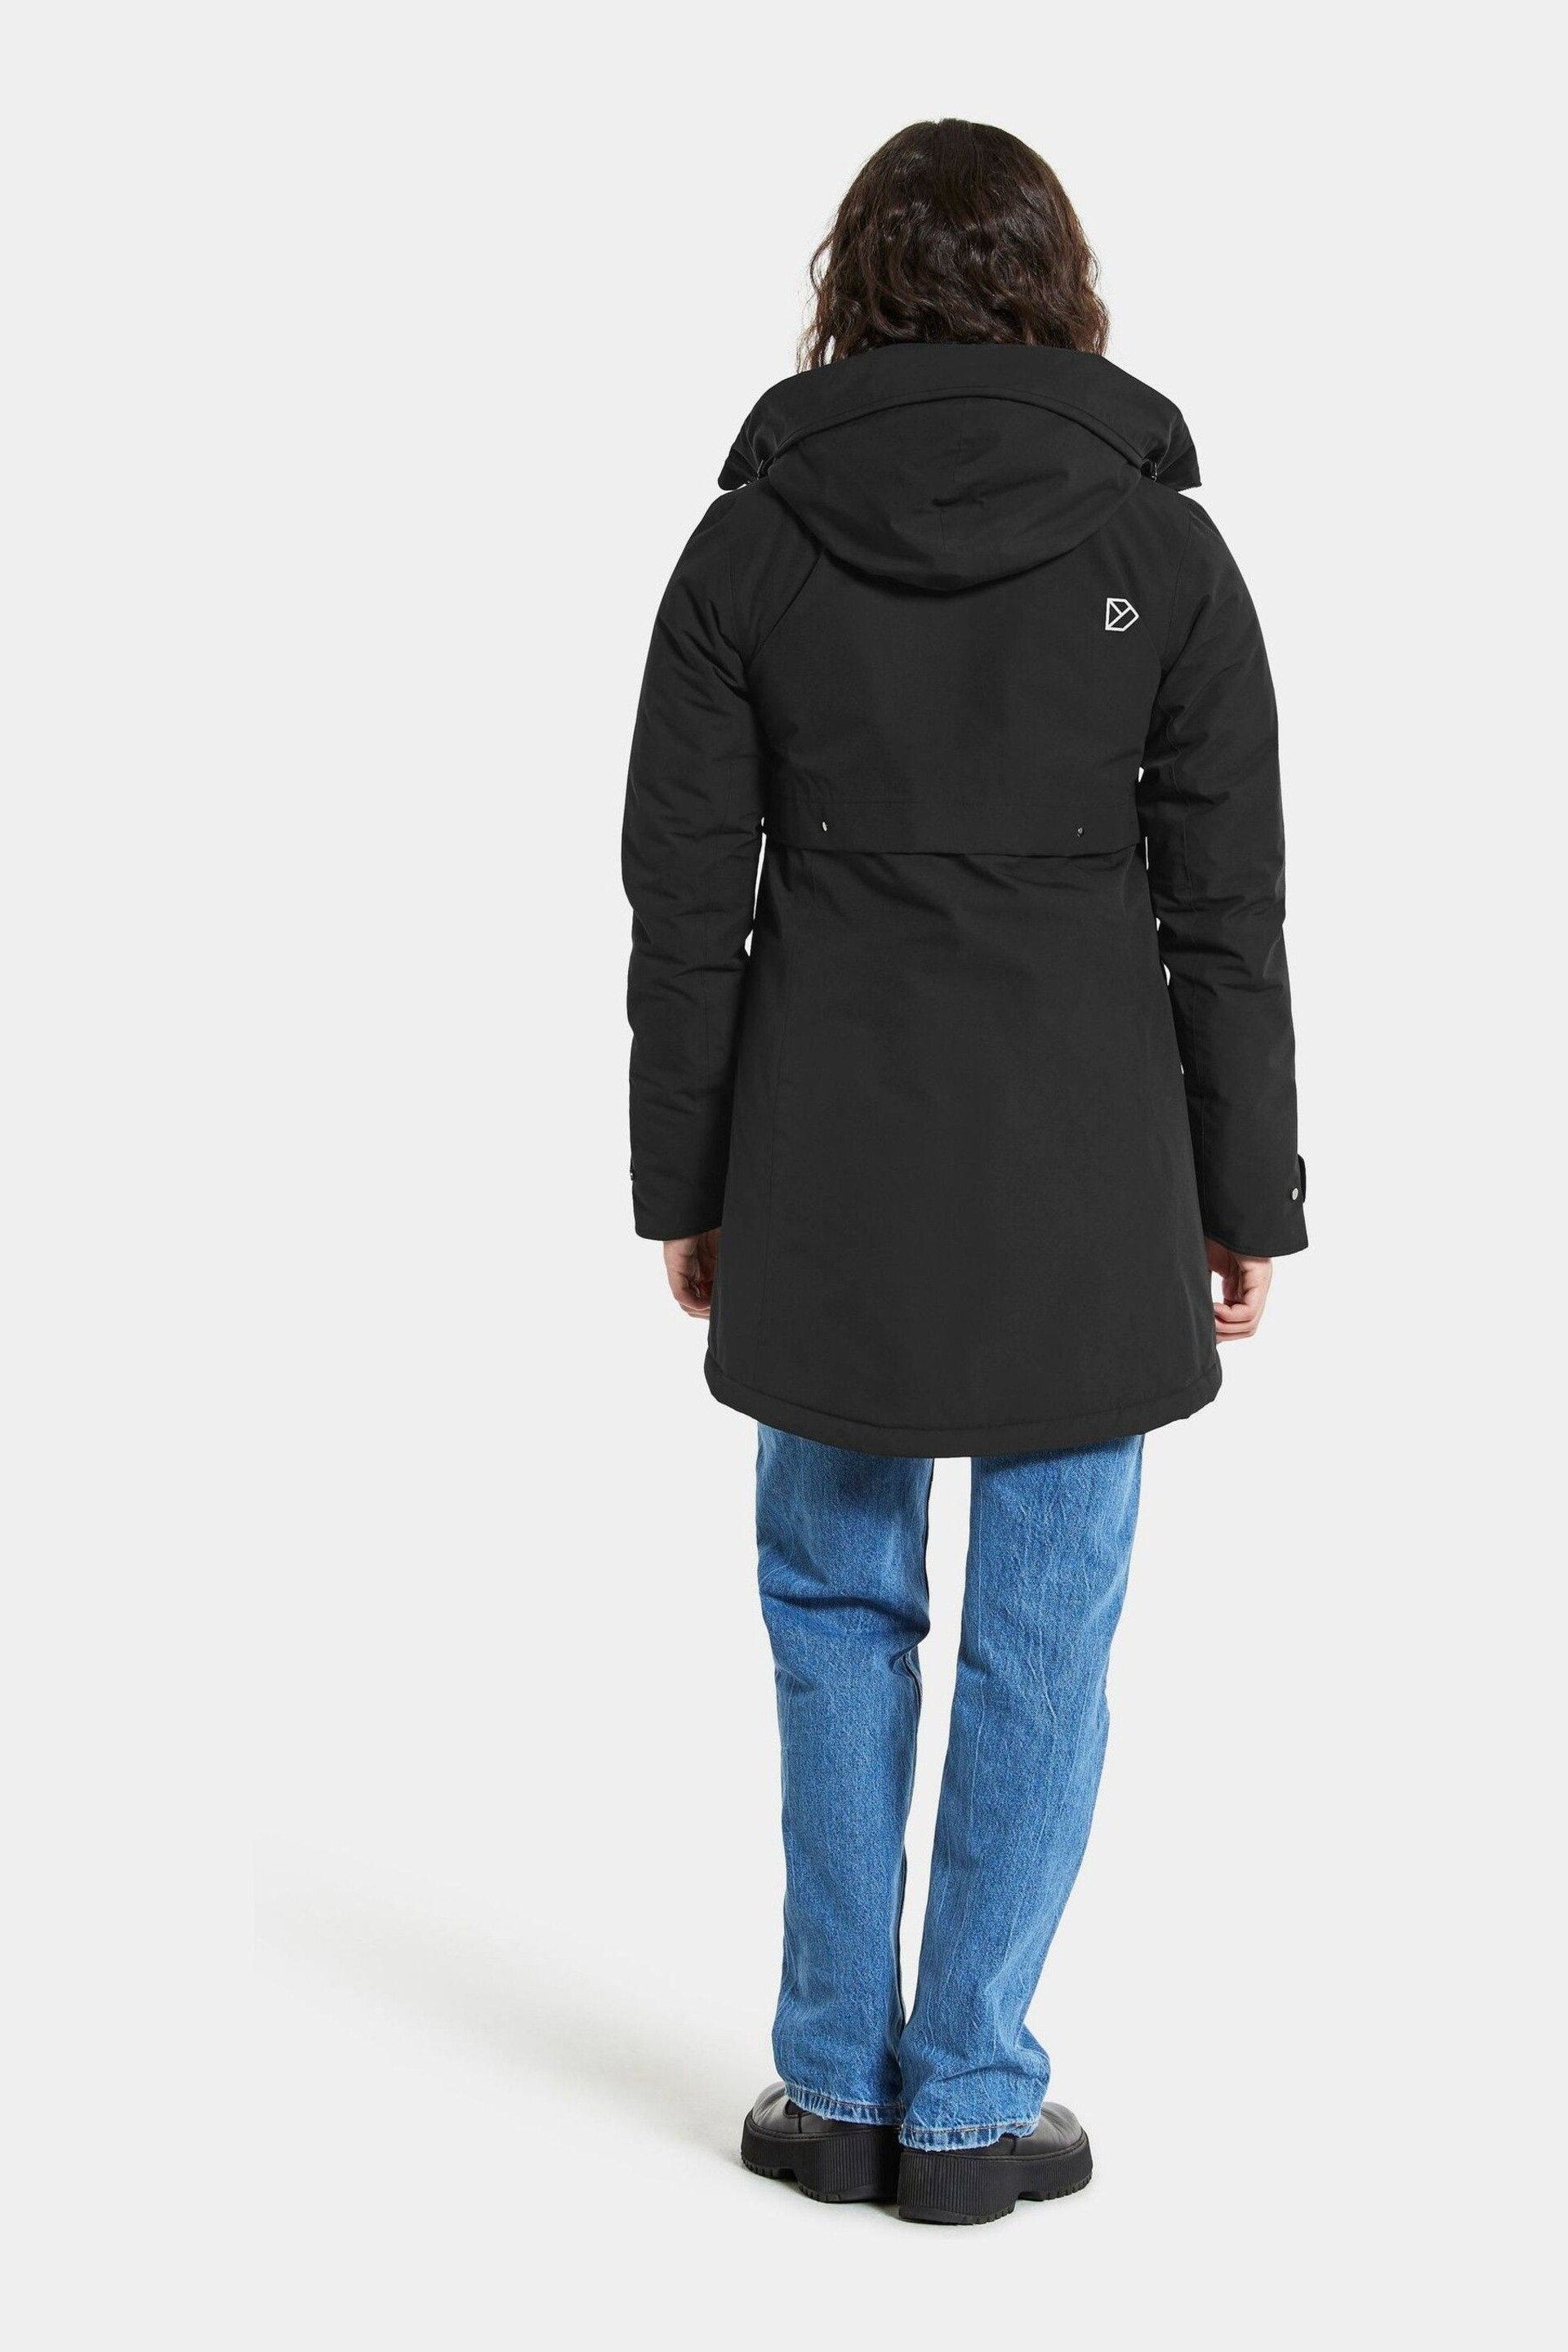 Didriksons Helle Wns Parka 5 Black Jacket - Image 2 of 5